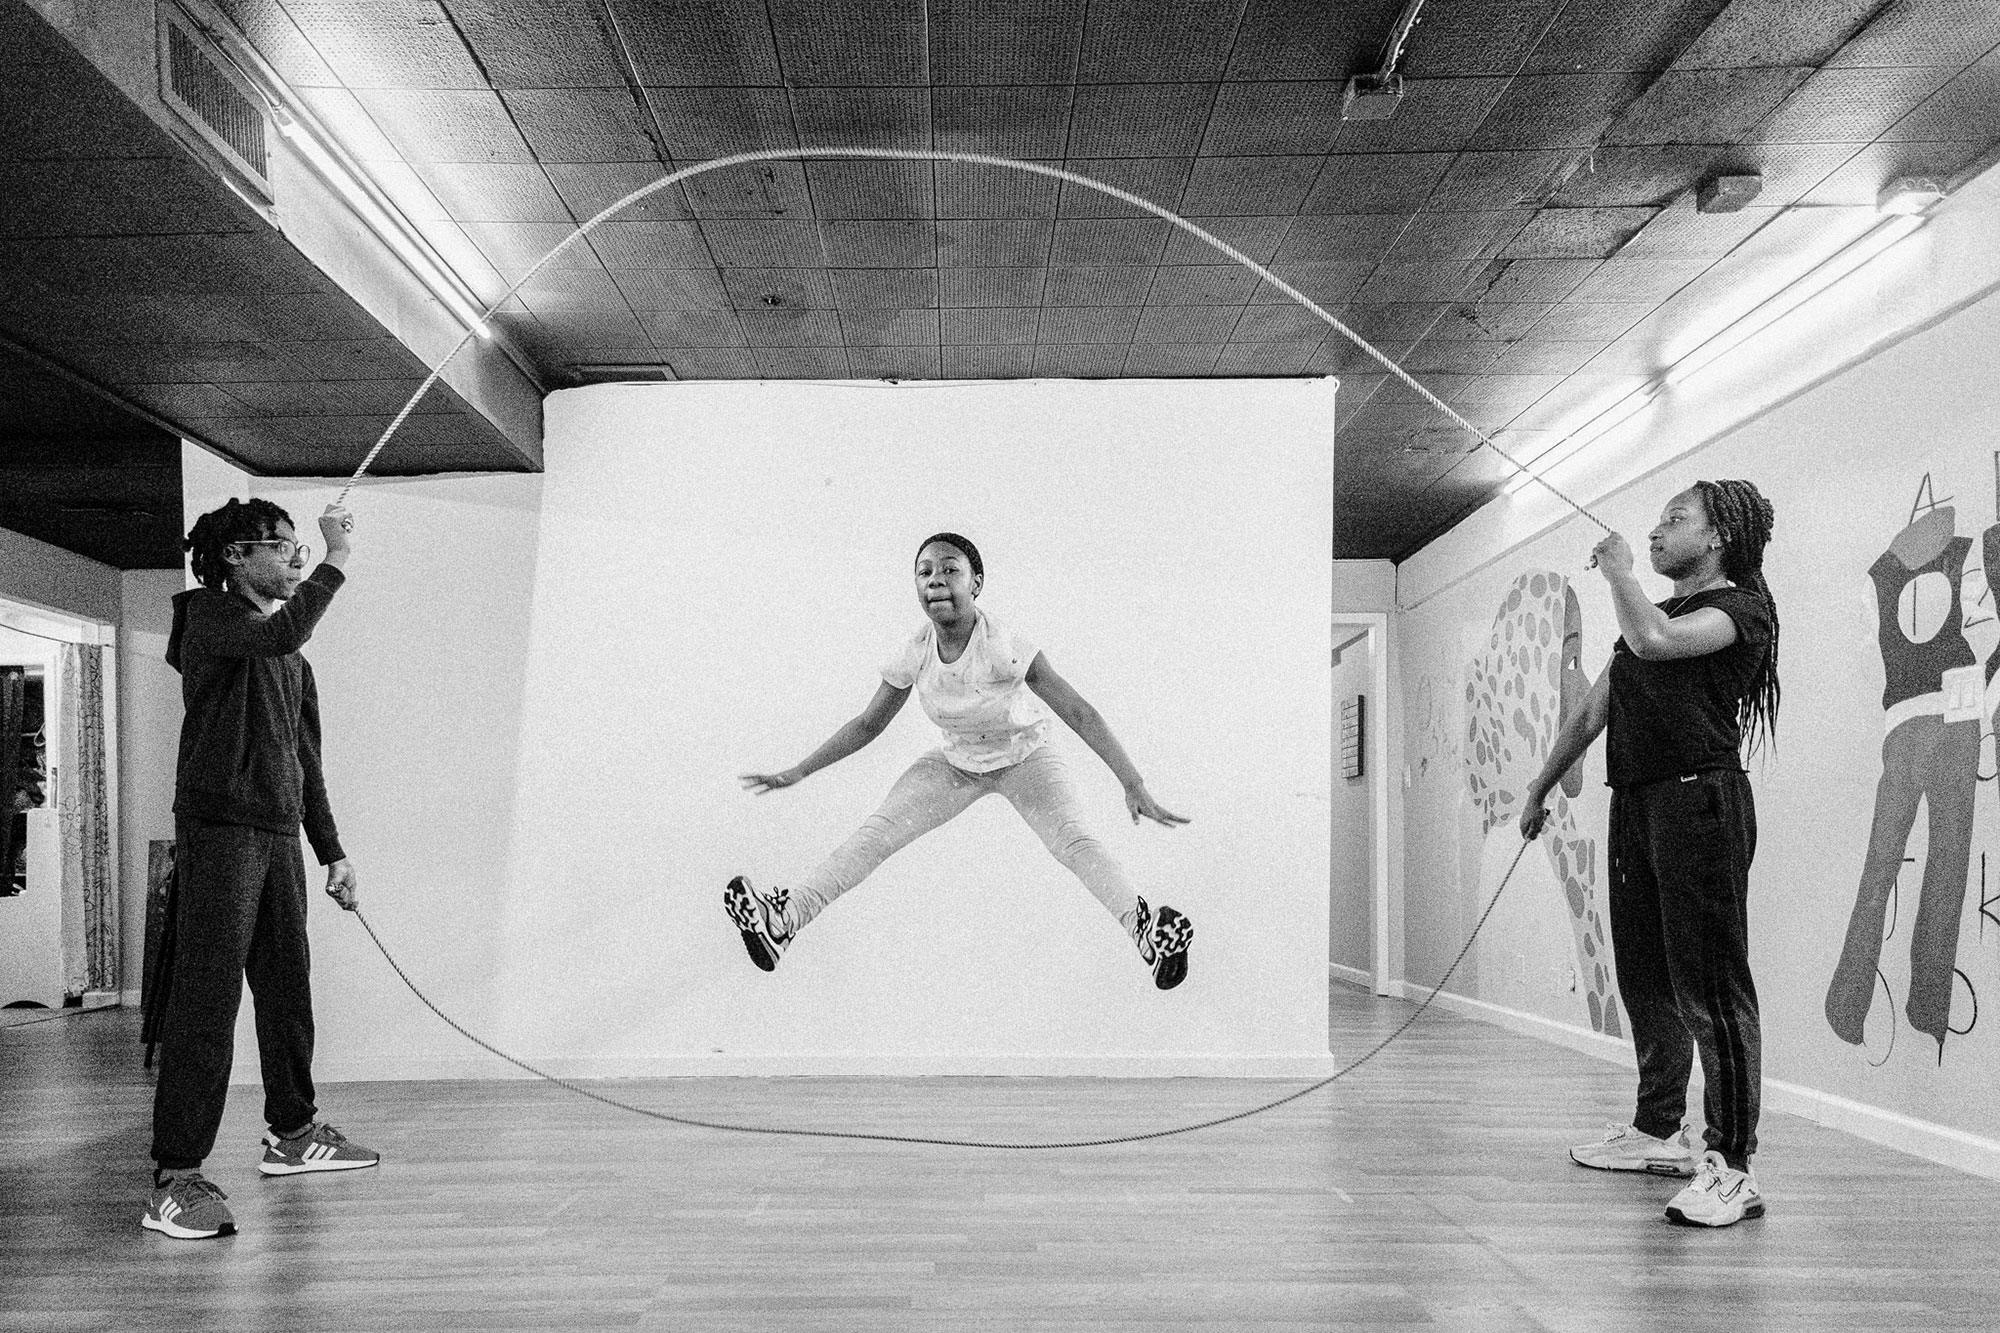 Chris Facey, Untitled image from the double Dutch story (Copyright © Chris Facey)